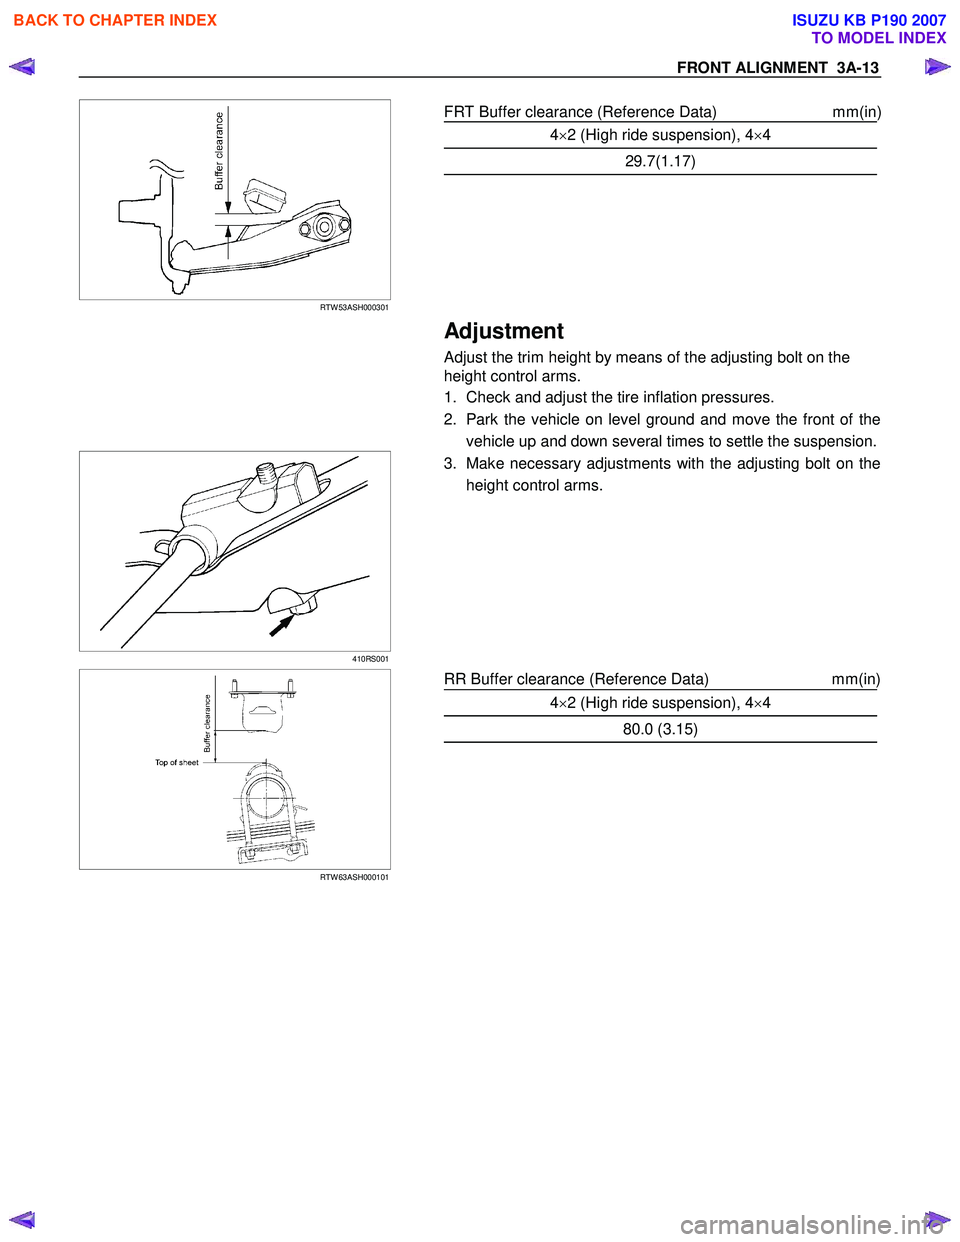 ISUZU KB P190 2007  Workshop Repair Manual FRONT ALIGNMENT  3A-13 
  
 RTW 53ASH000301 
 FRT Buffer clearance (Reference Data)  mm(in)
 
4×2 (High ride suspension), 4 ×4 
29.7(1.17) 
    
 Adjustment 
Adjust the trim height by means of the a